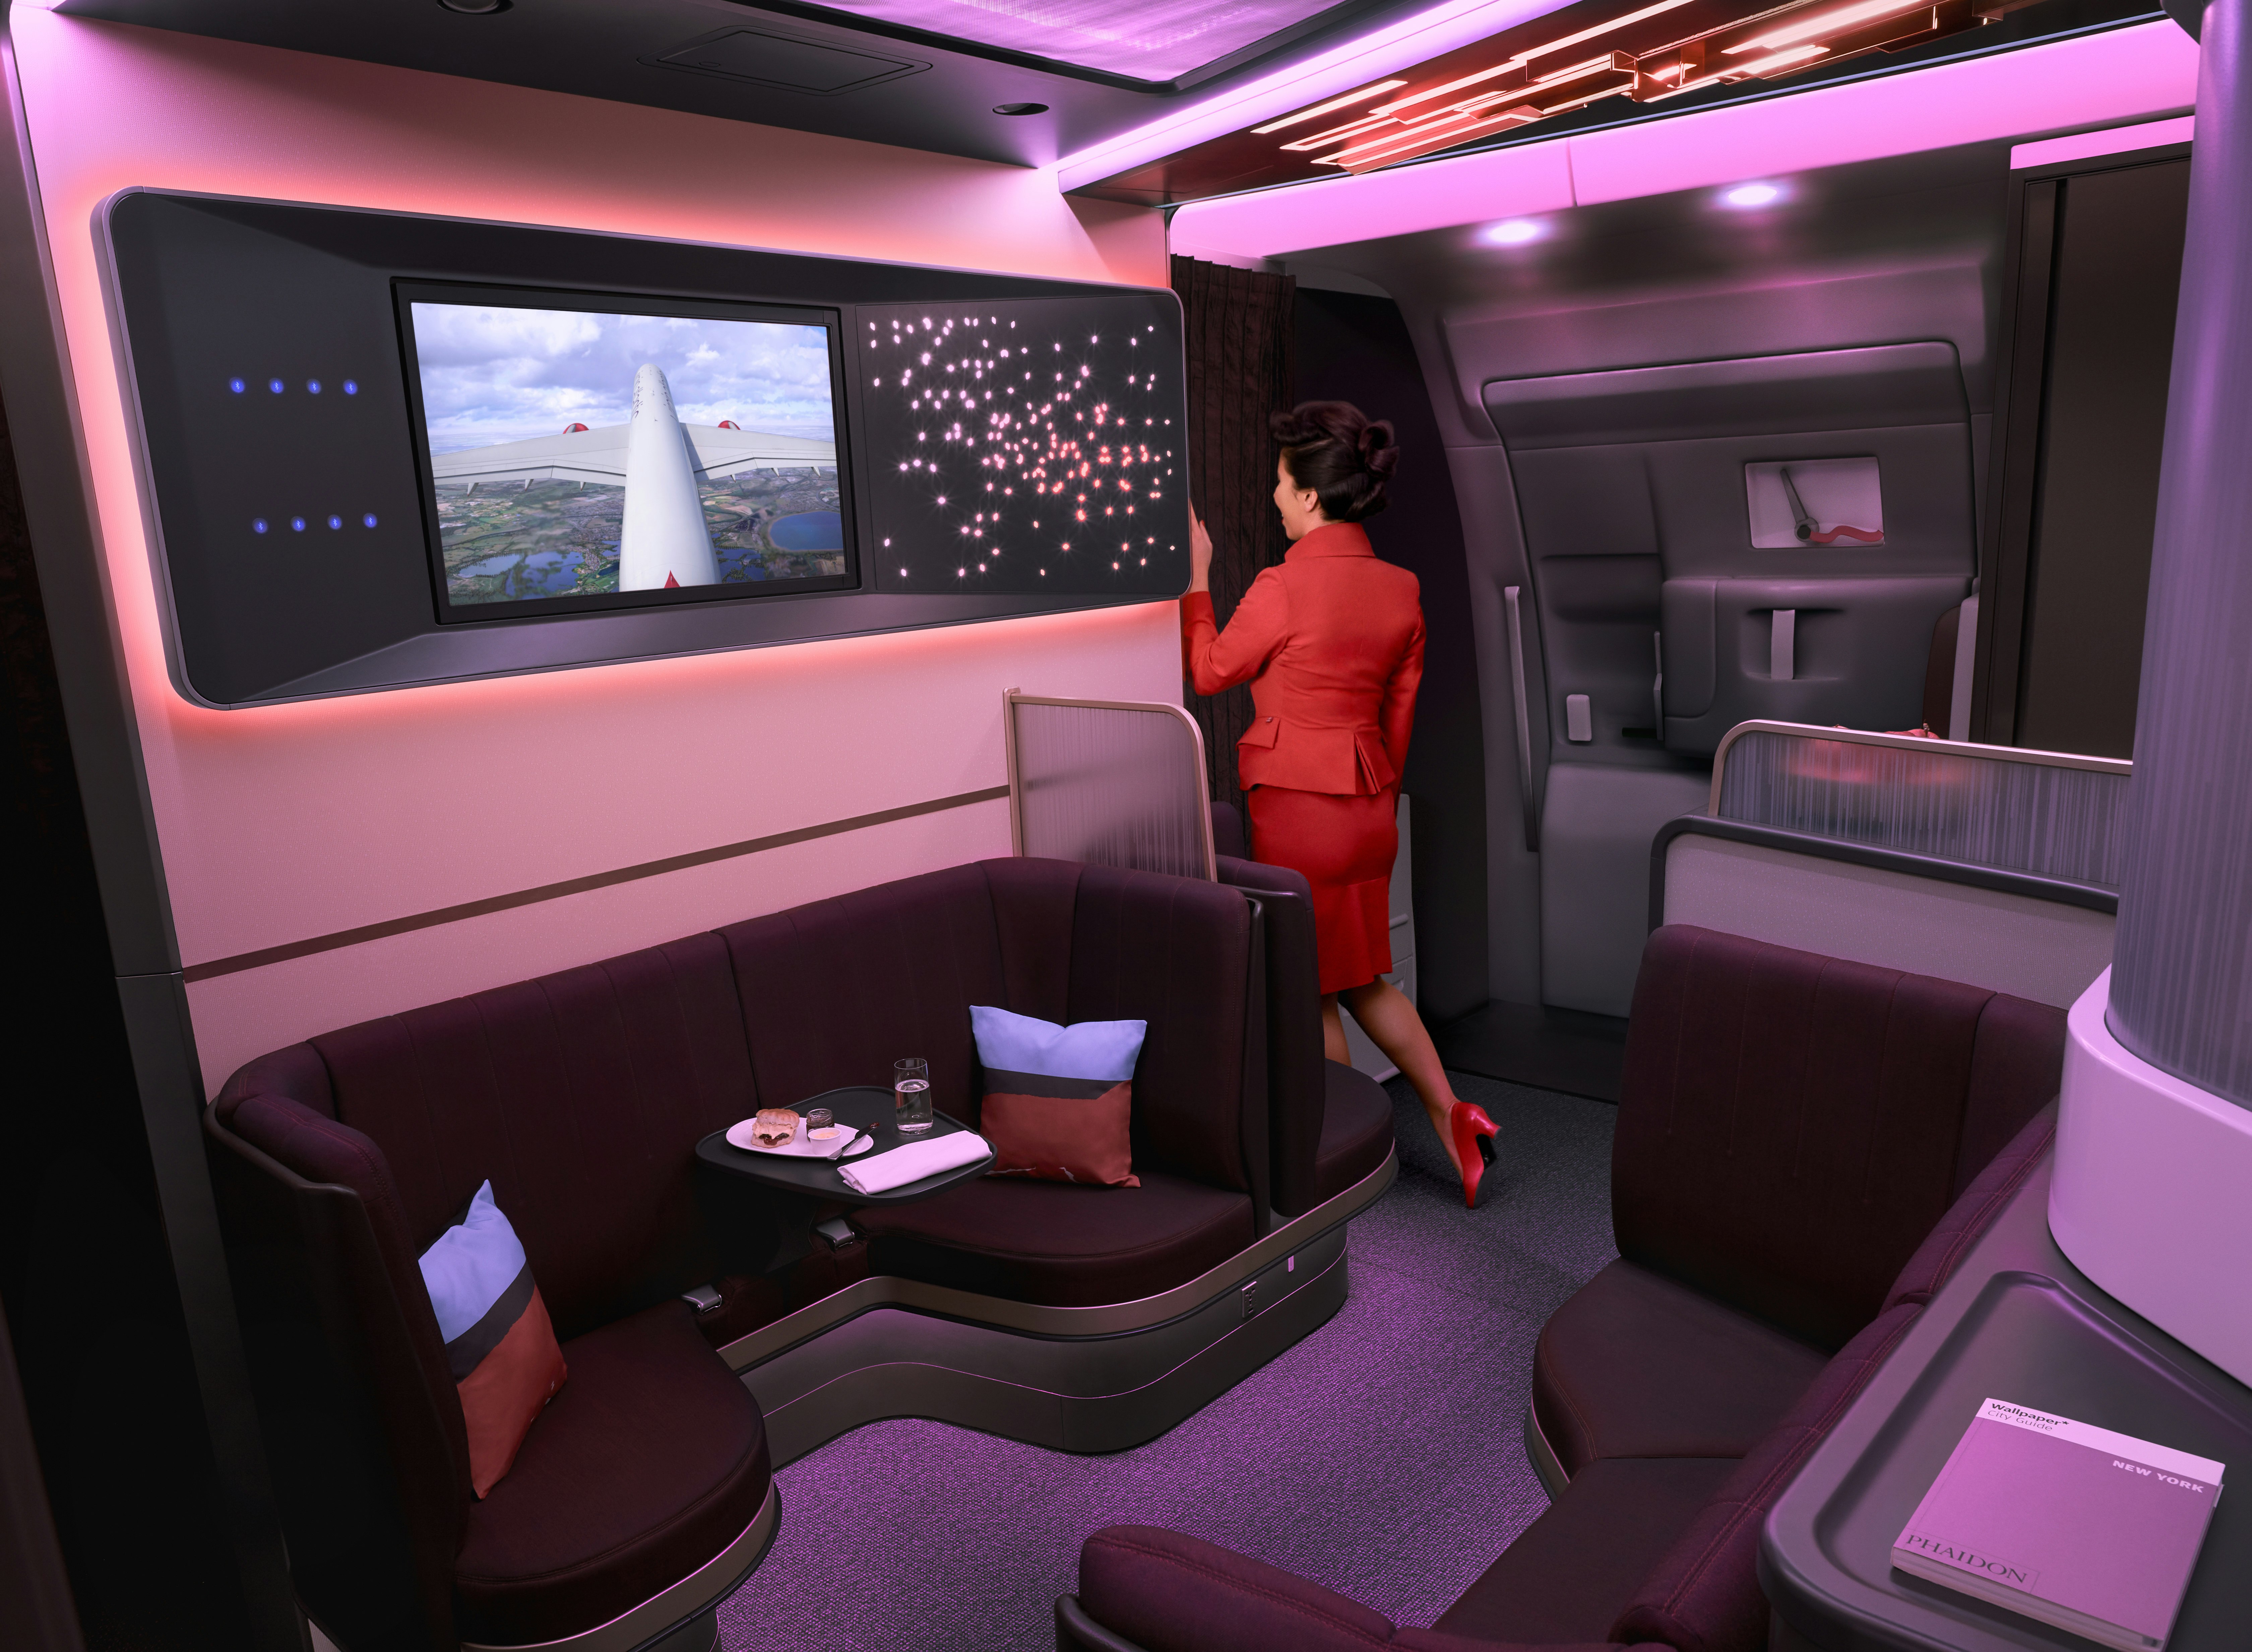 A screen and lounge area on a Virgin flight